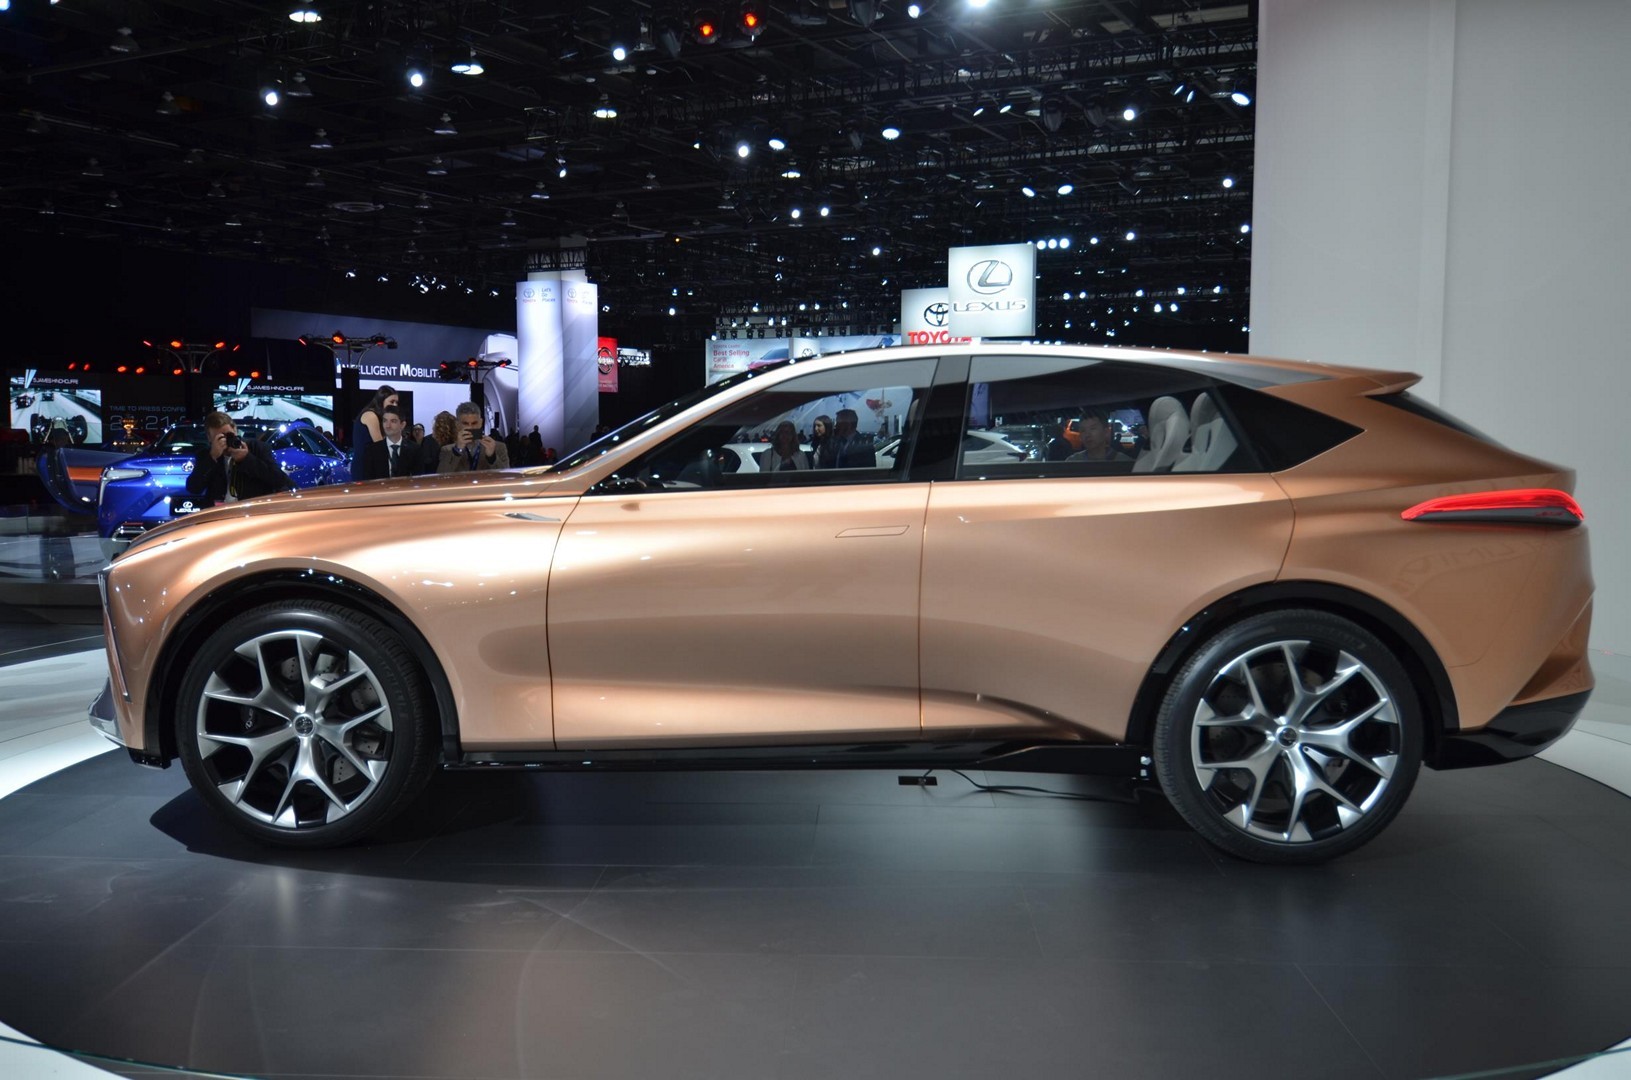 Lexus LF Flagship SUV Based on RWD Platform Could Cost $180,000